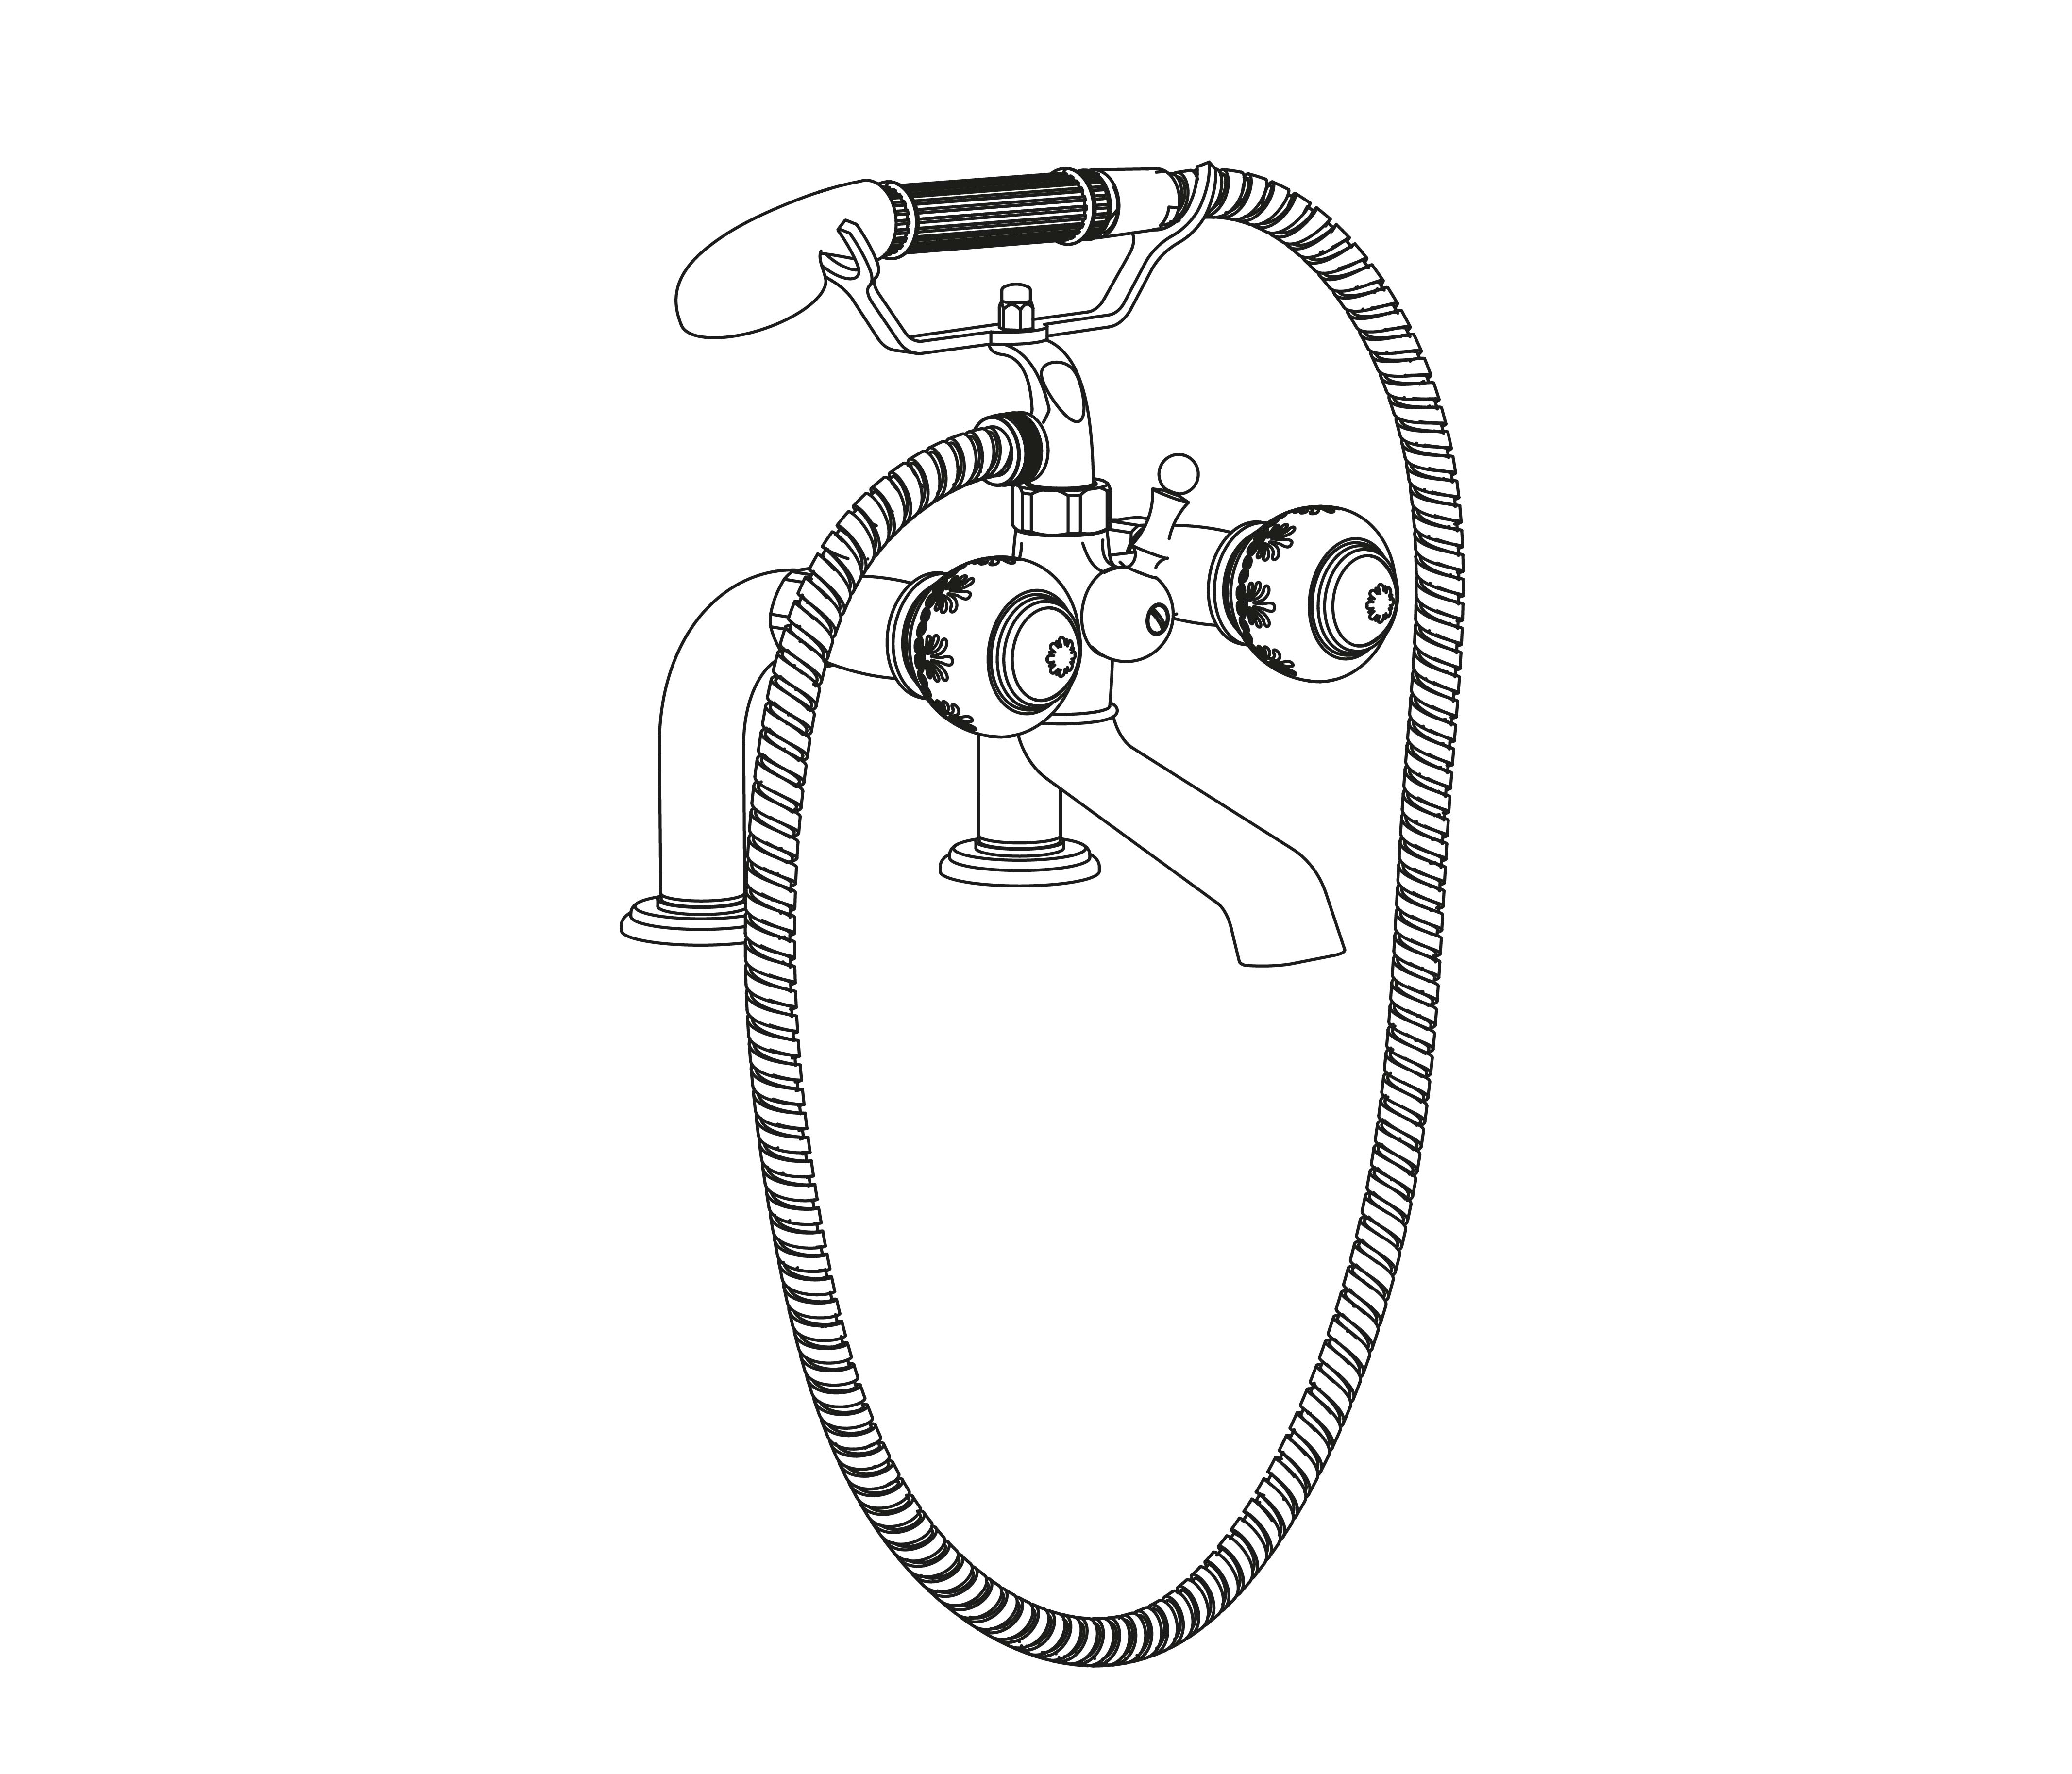 S196-3306 Rim mounted bath and shower mixer